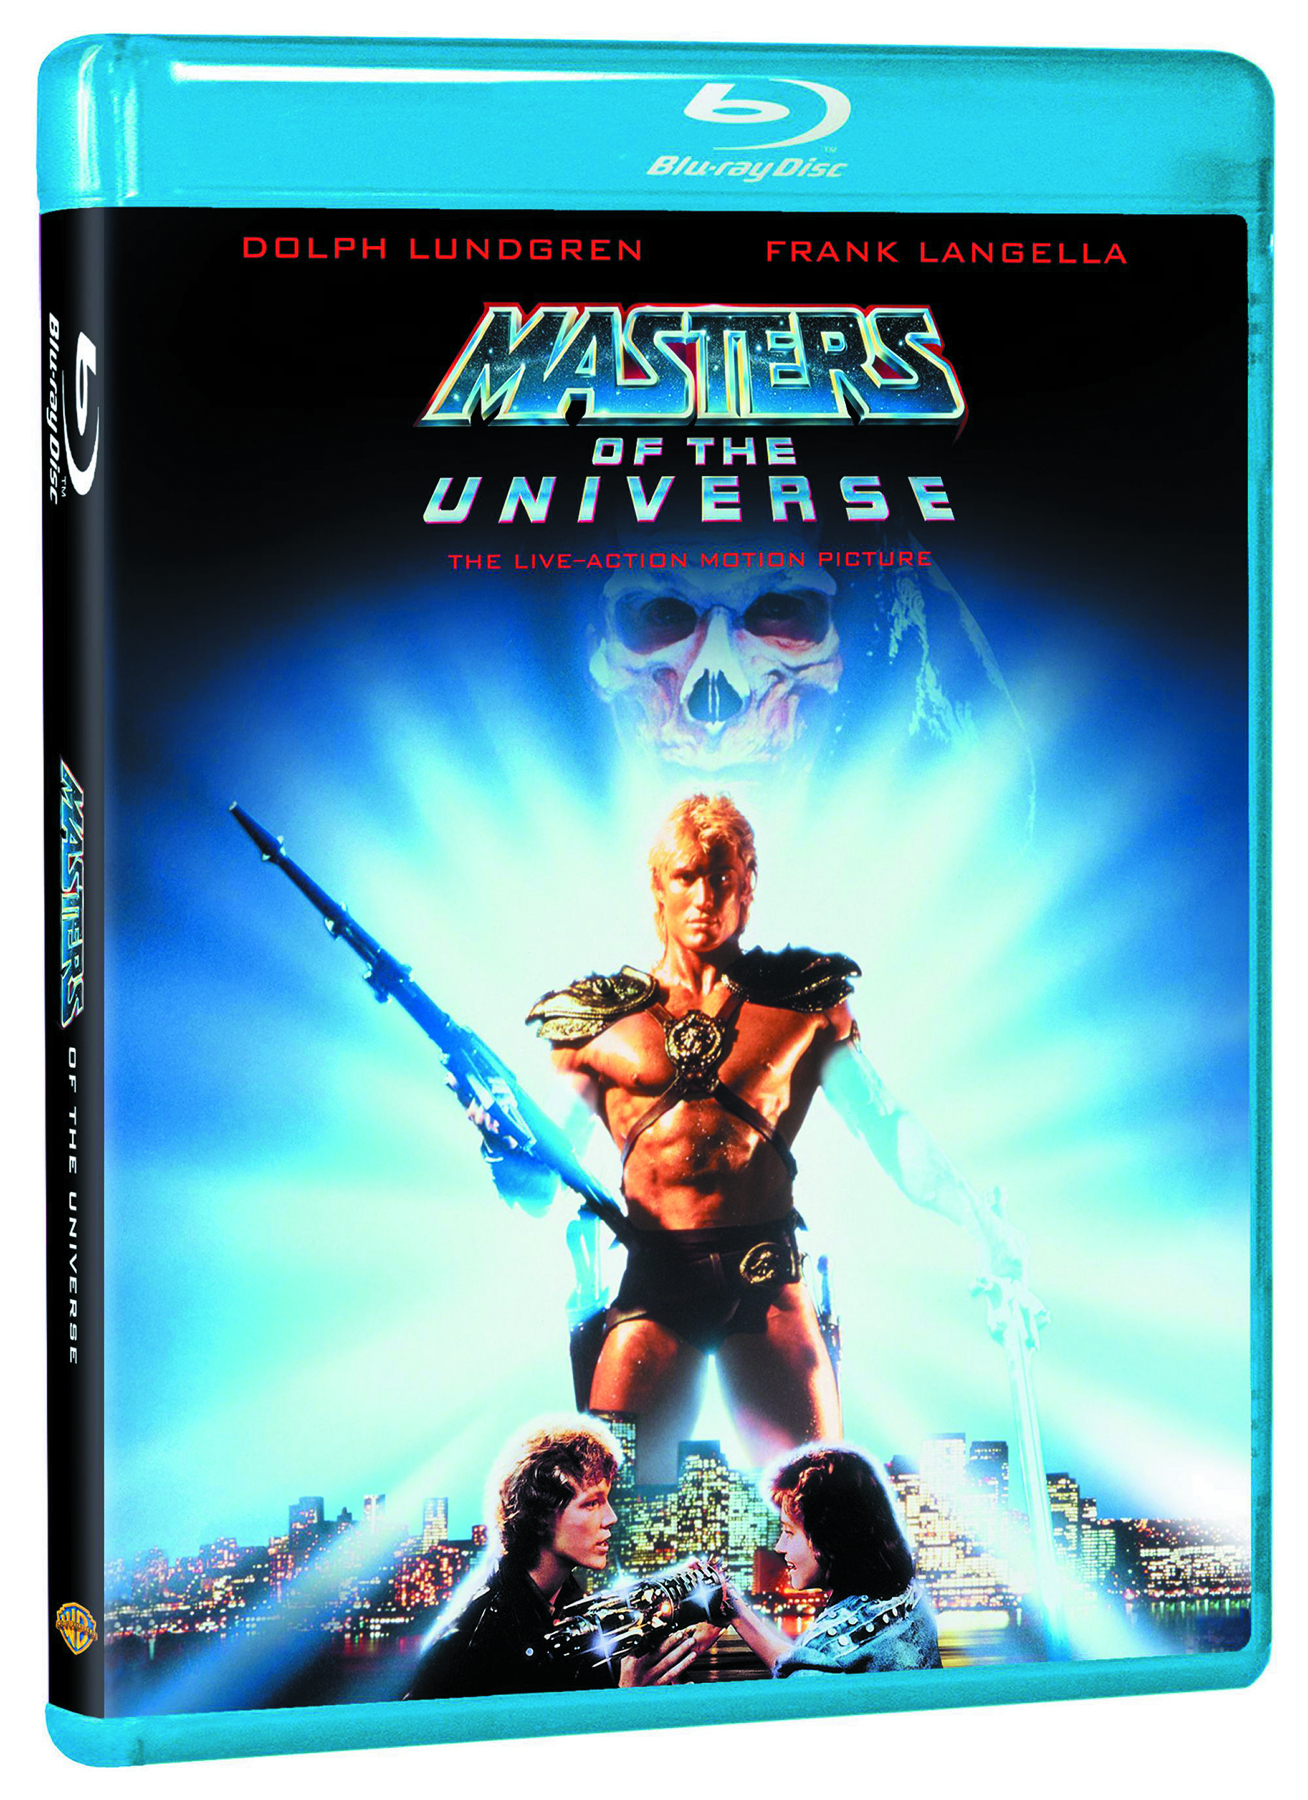 MASTERS OF THE UNIVERSE BD